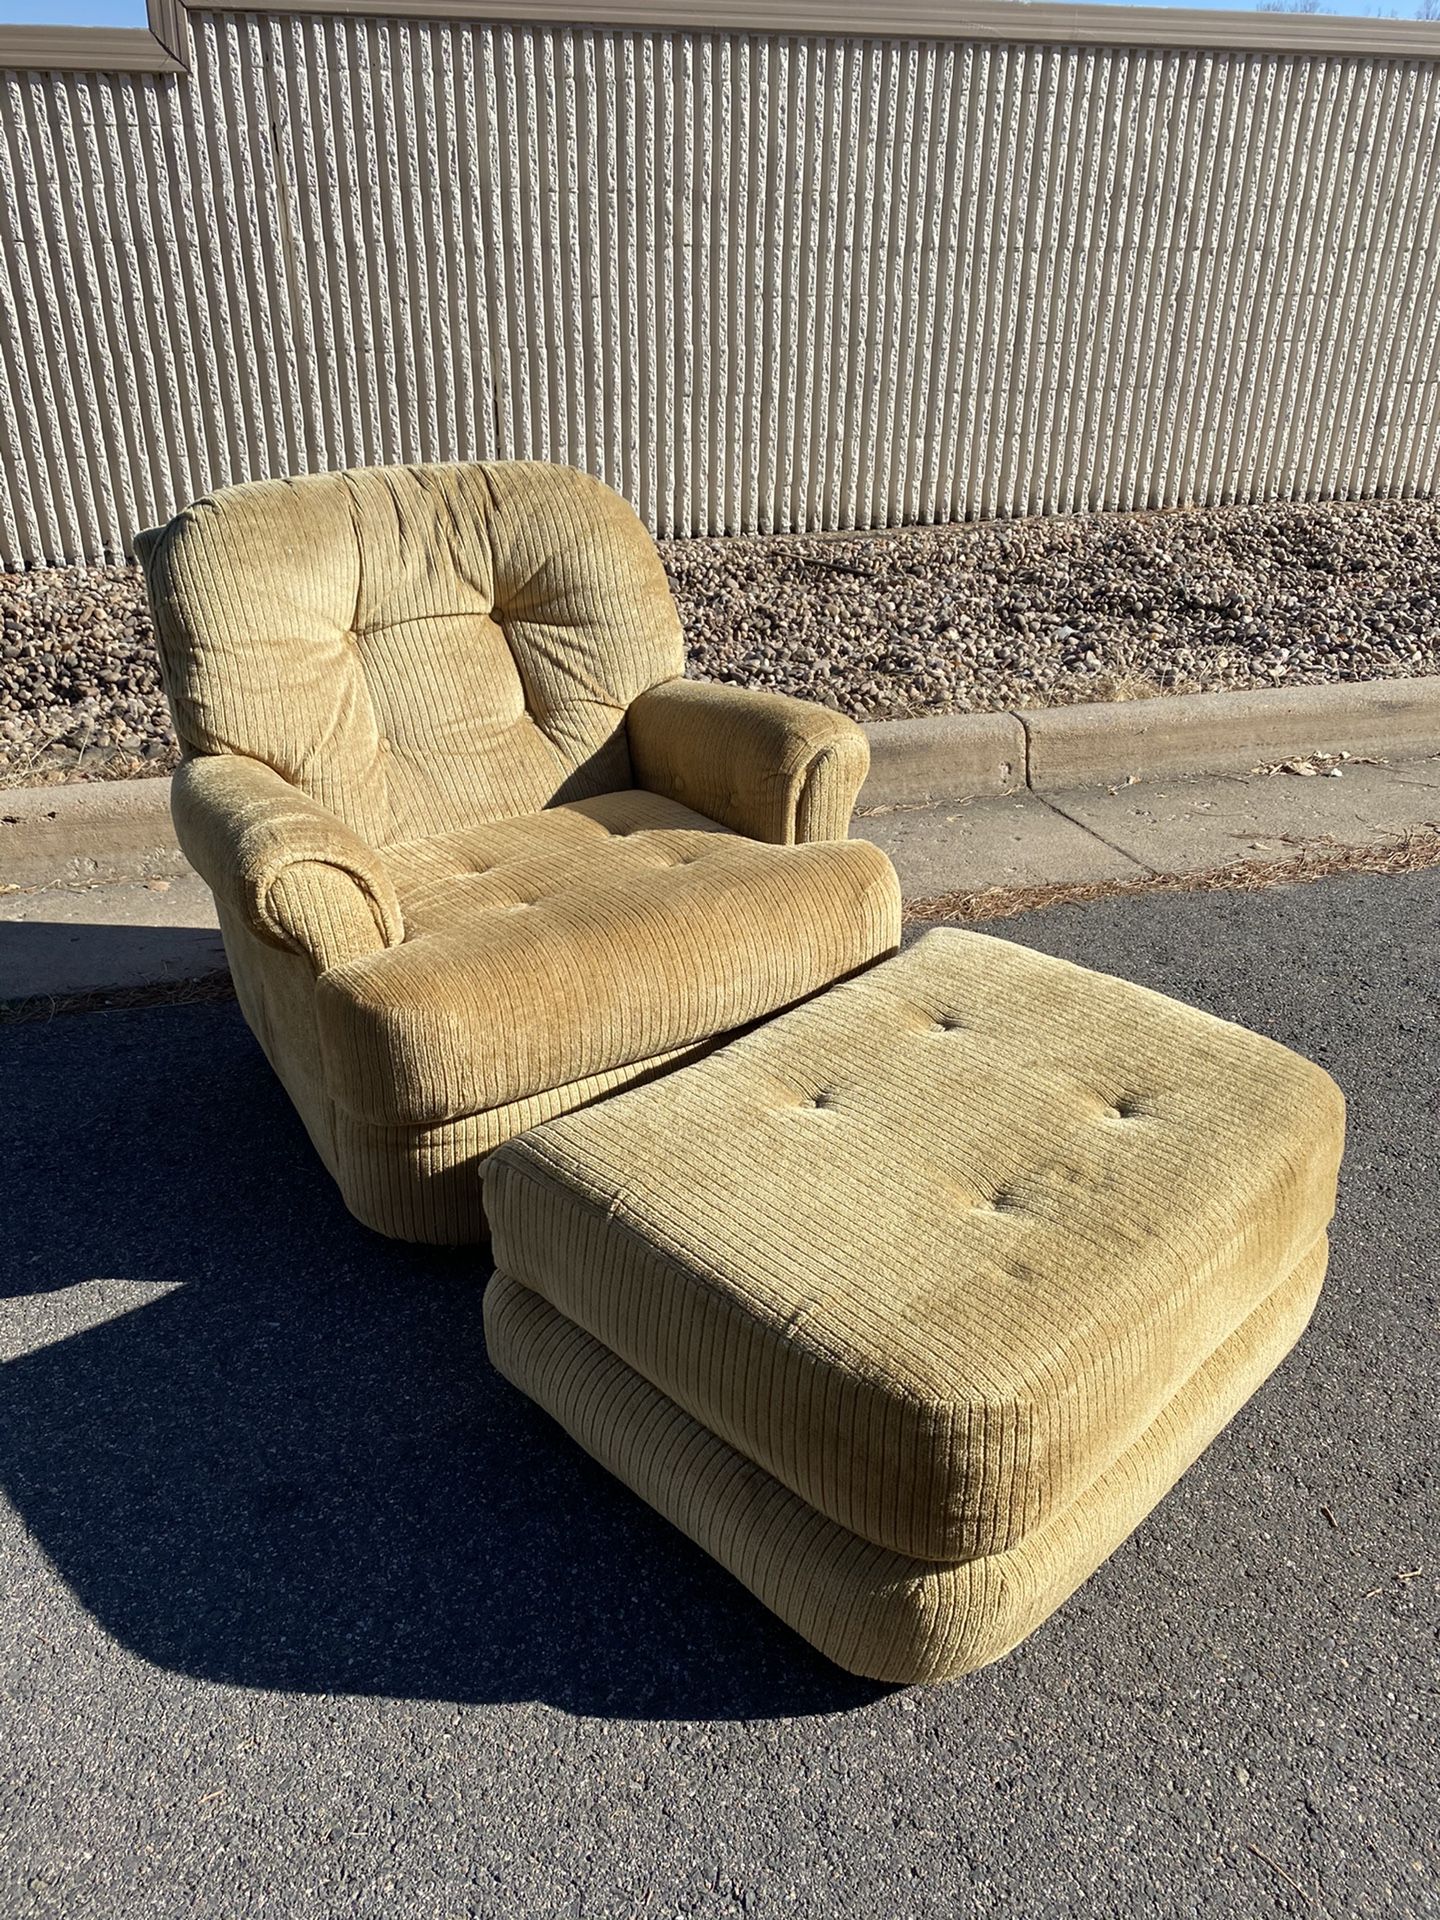 Retro/vintage swivel reading chair w/ottoman // FREE DELIVERY